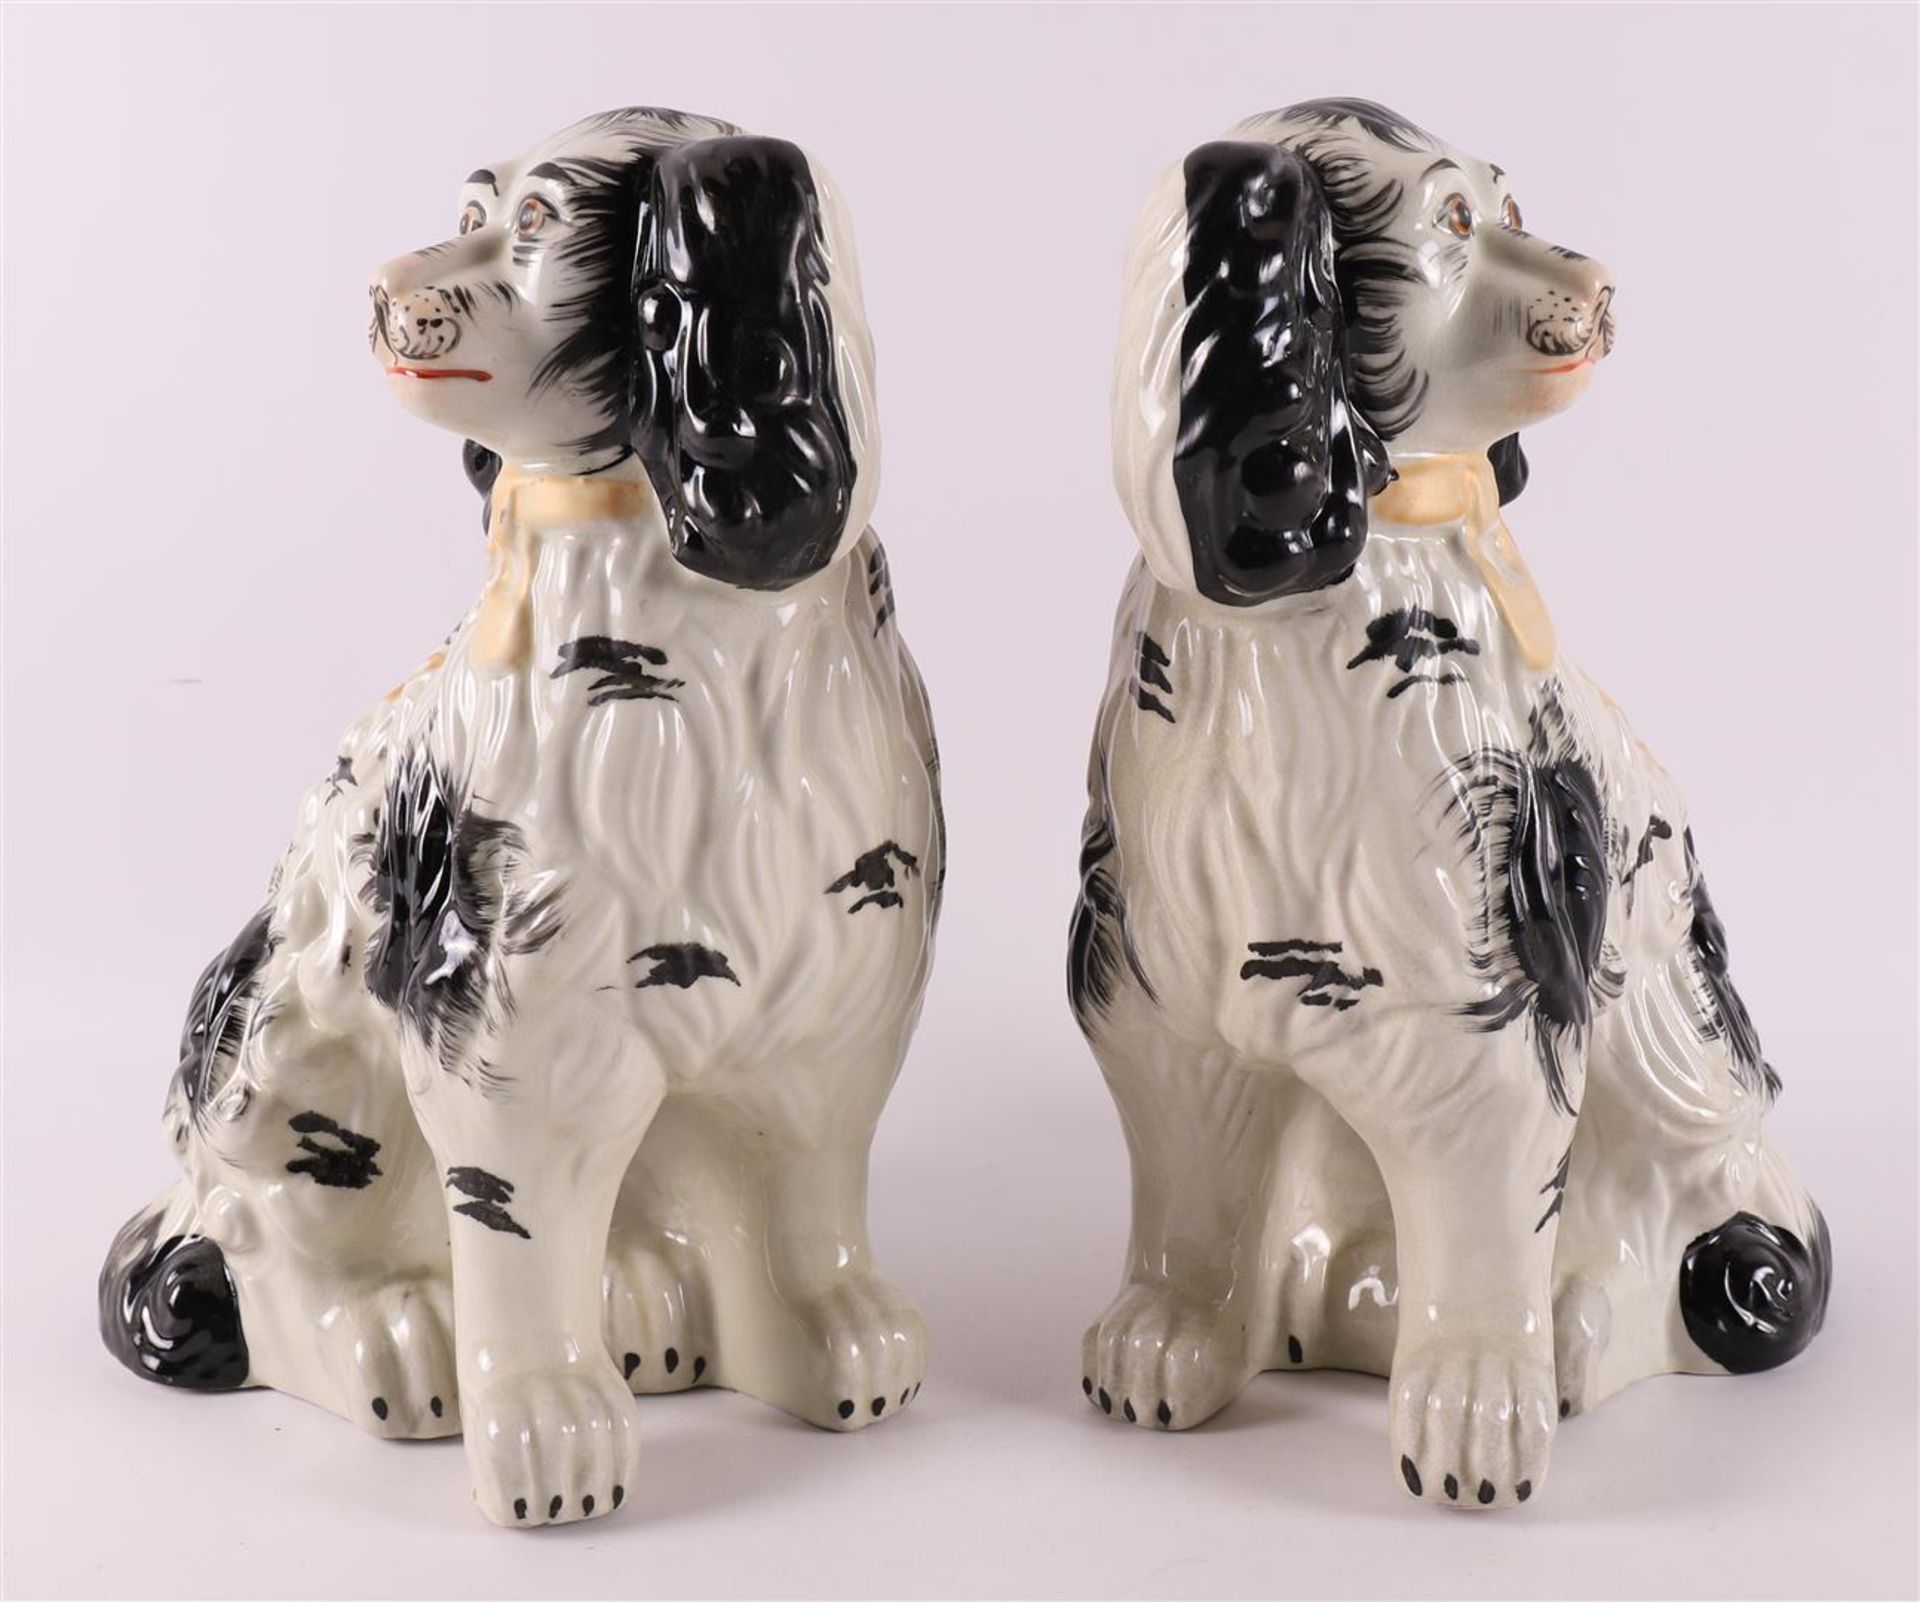 A pair of black and white earthenware dogs, England, Staffordshire, 19th century - Image 2 of 5